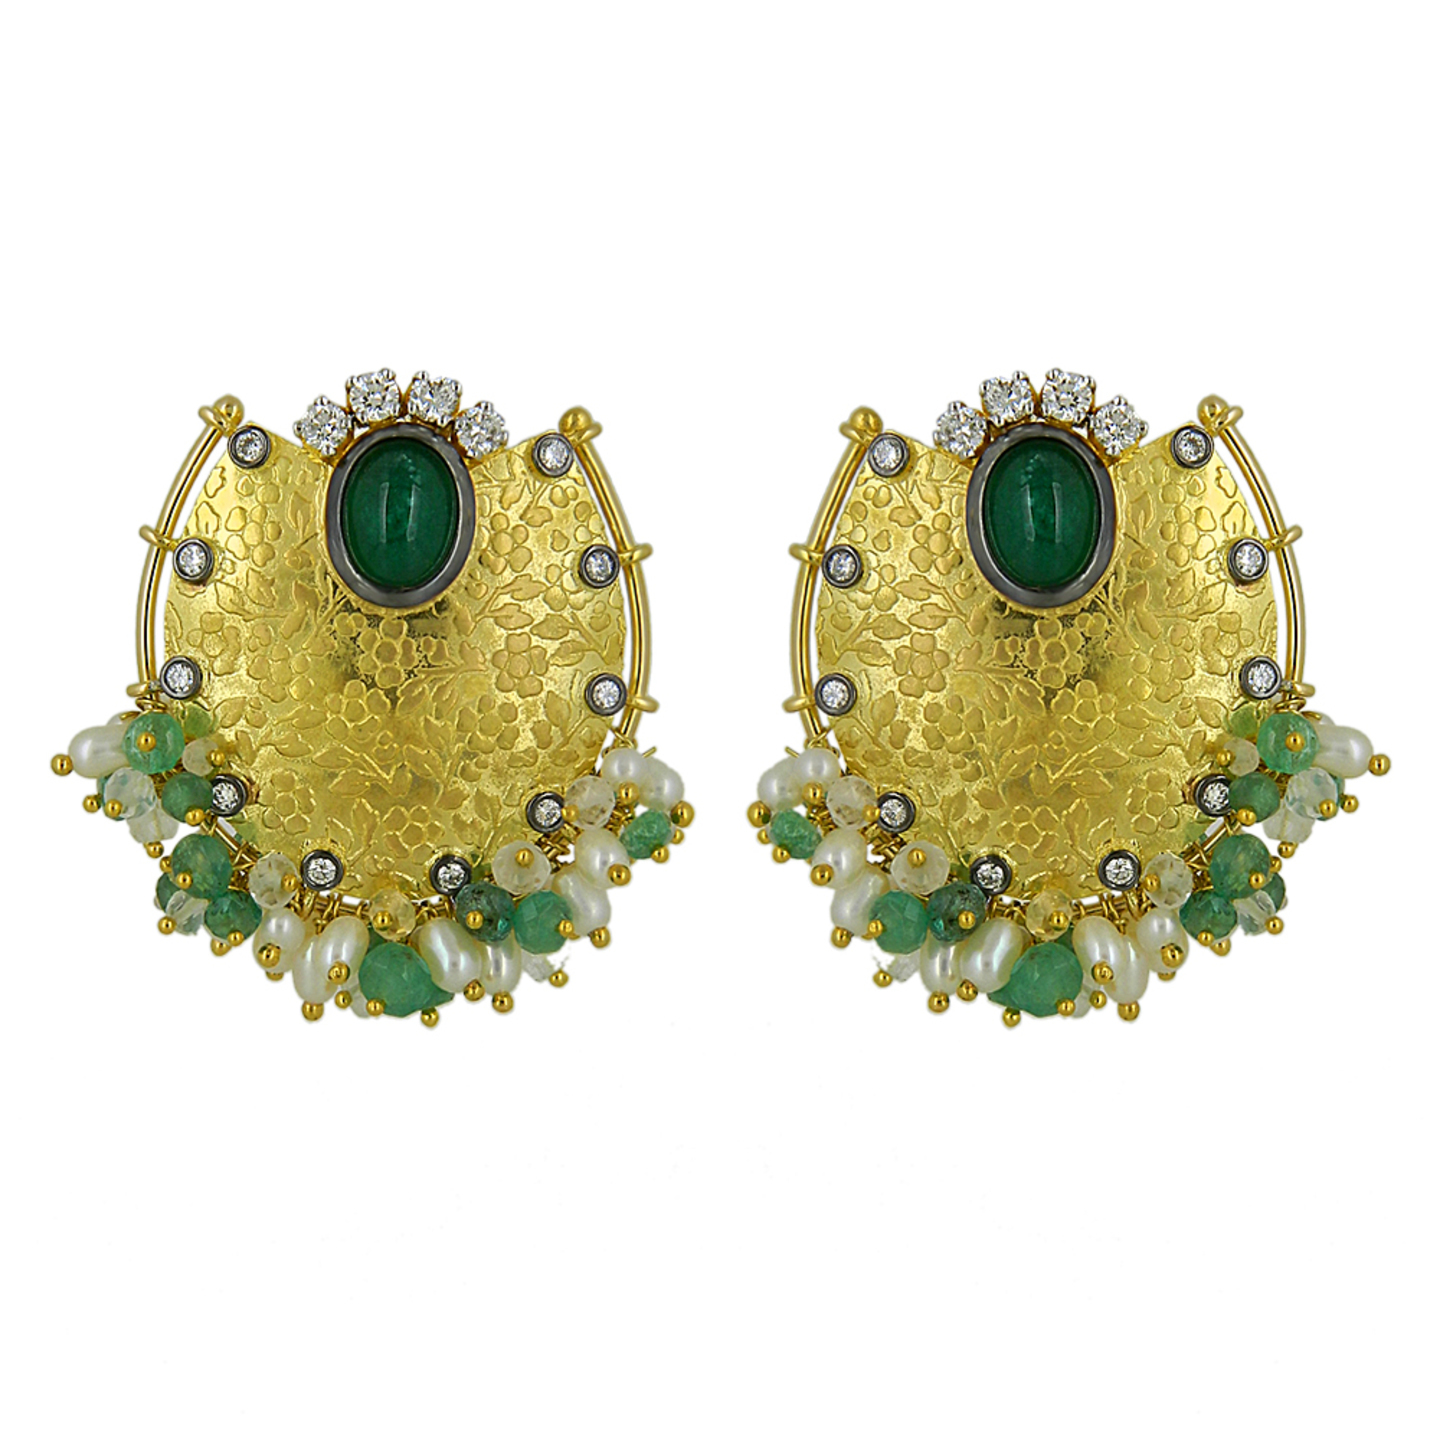 Remarkable large gold textured earrings, contrasted with tiny gem beads